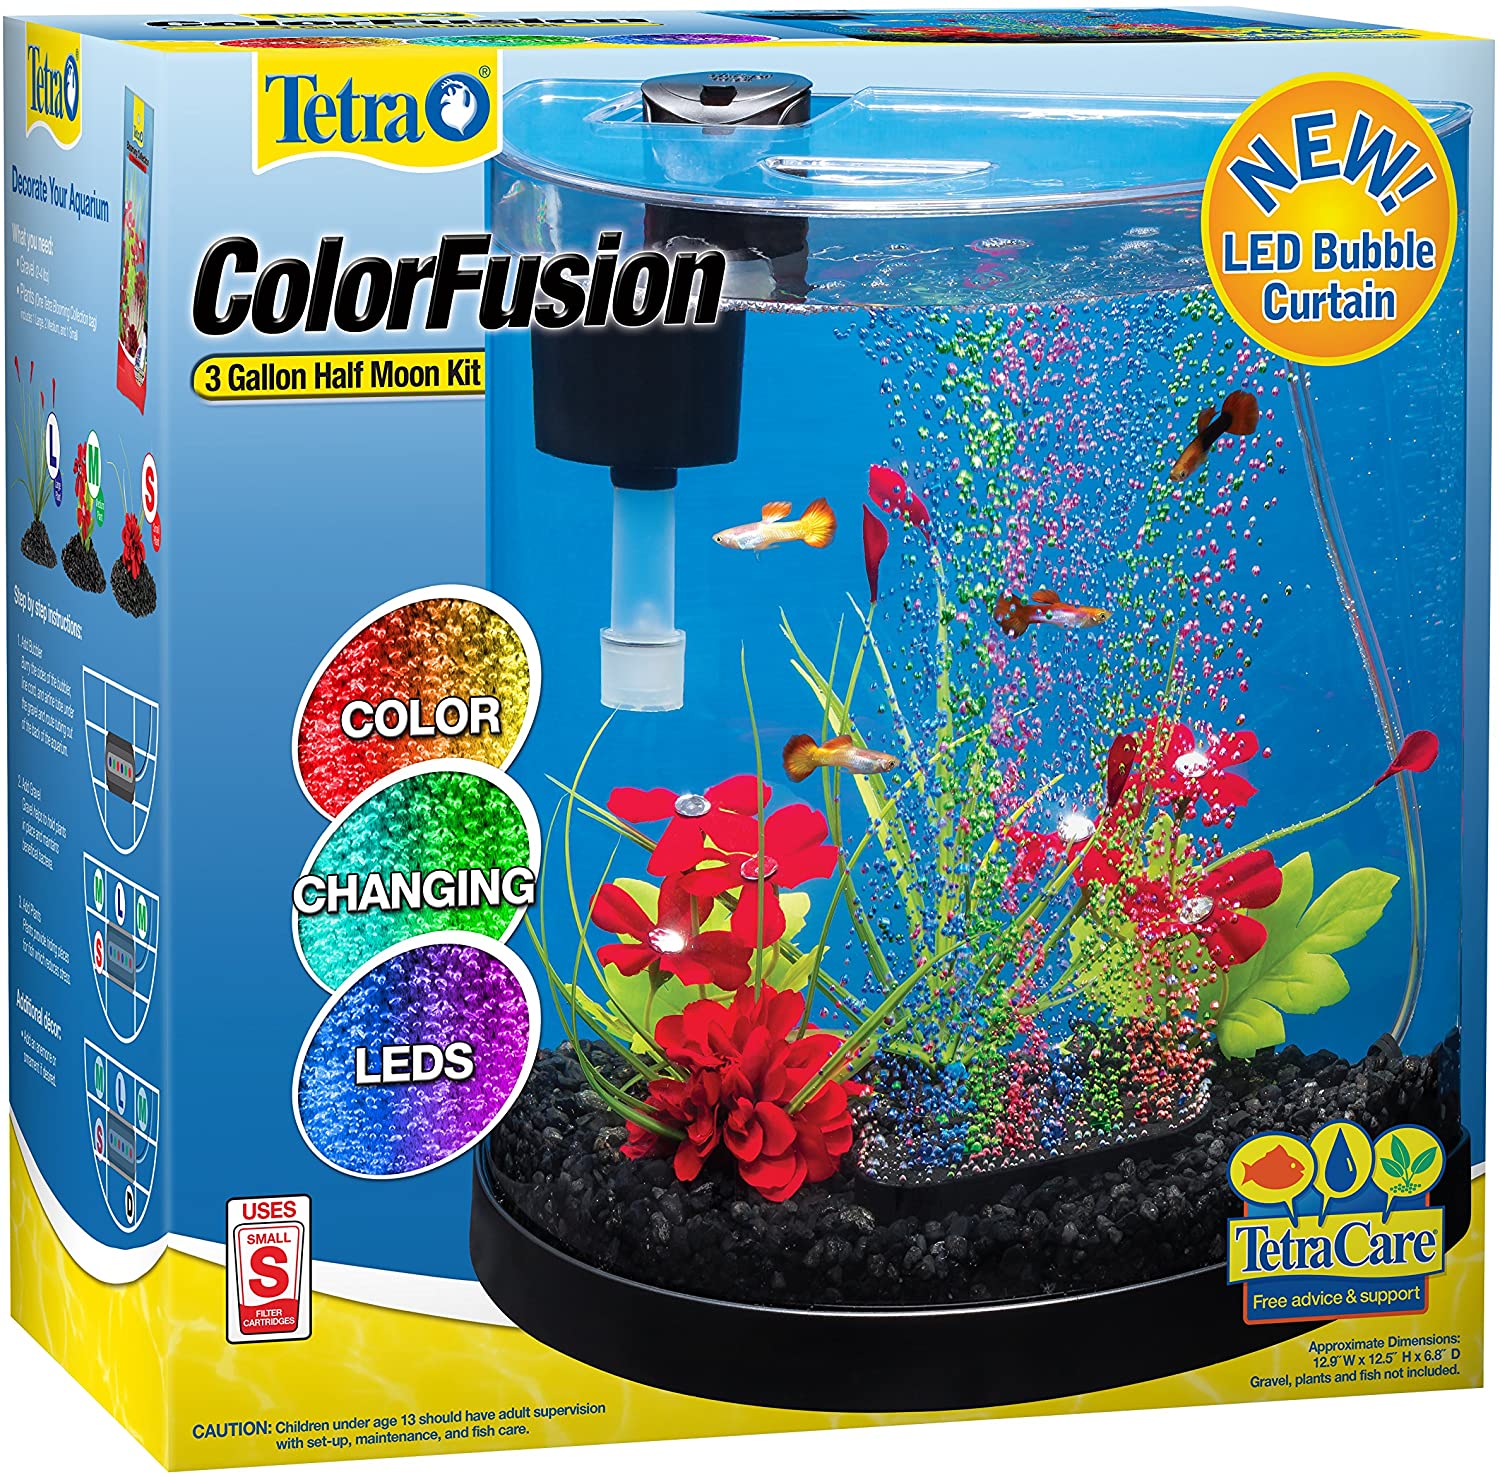 3 Gallon Fish Tanks Options and Reviews 2020 A Little